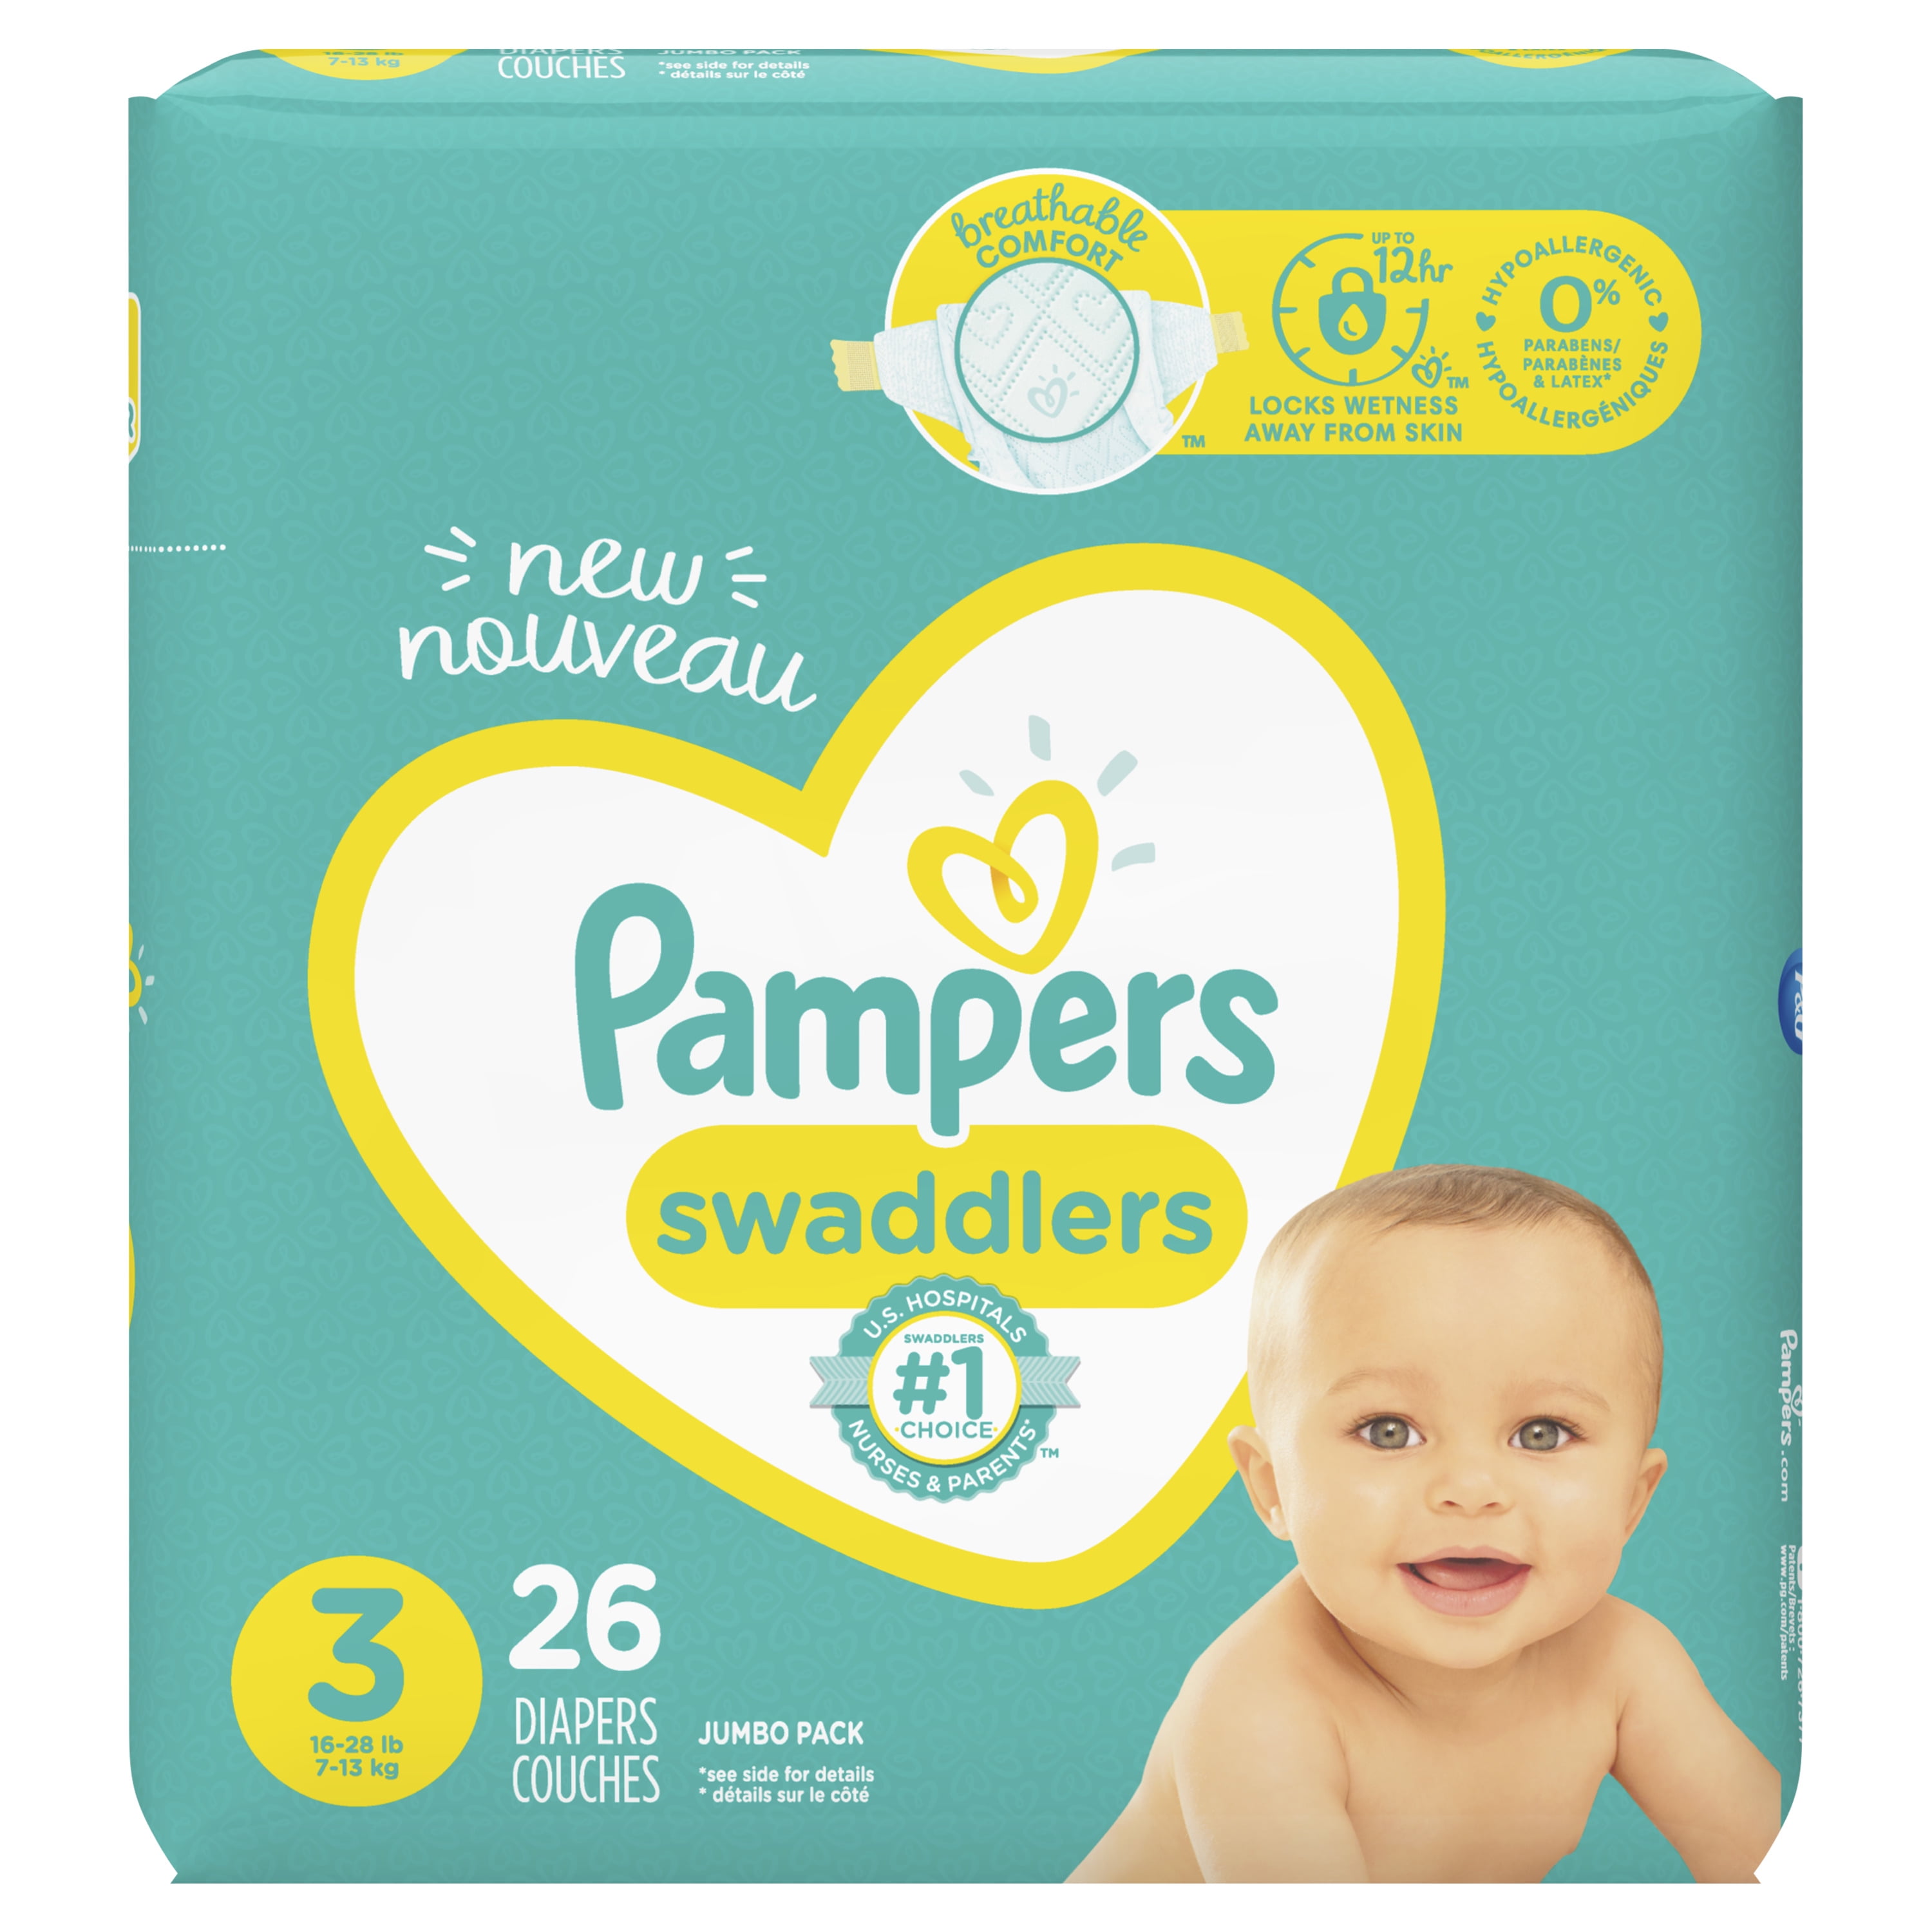 Kilimanjaro Briefcase Numeric Pampers Swaddlers Diapers, Soft and Absorbent, Size 3, 26 Ct - Walmart.com